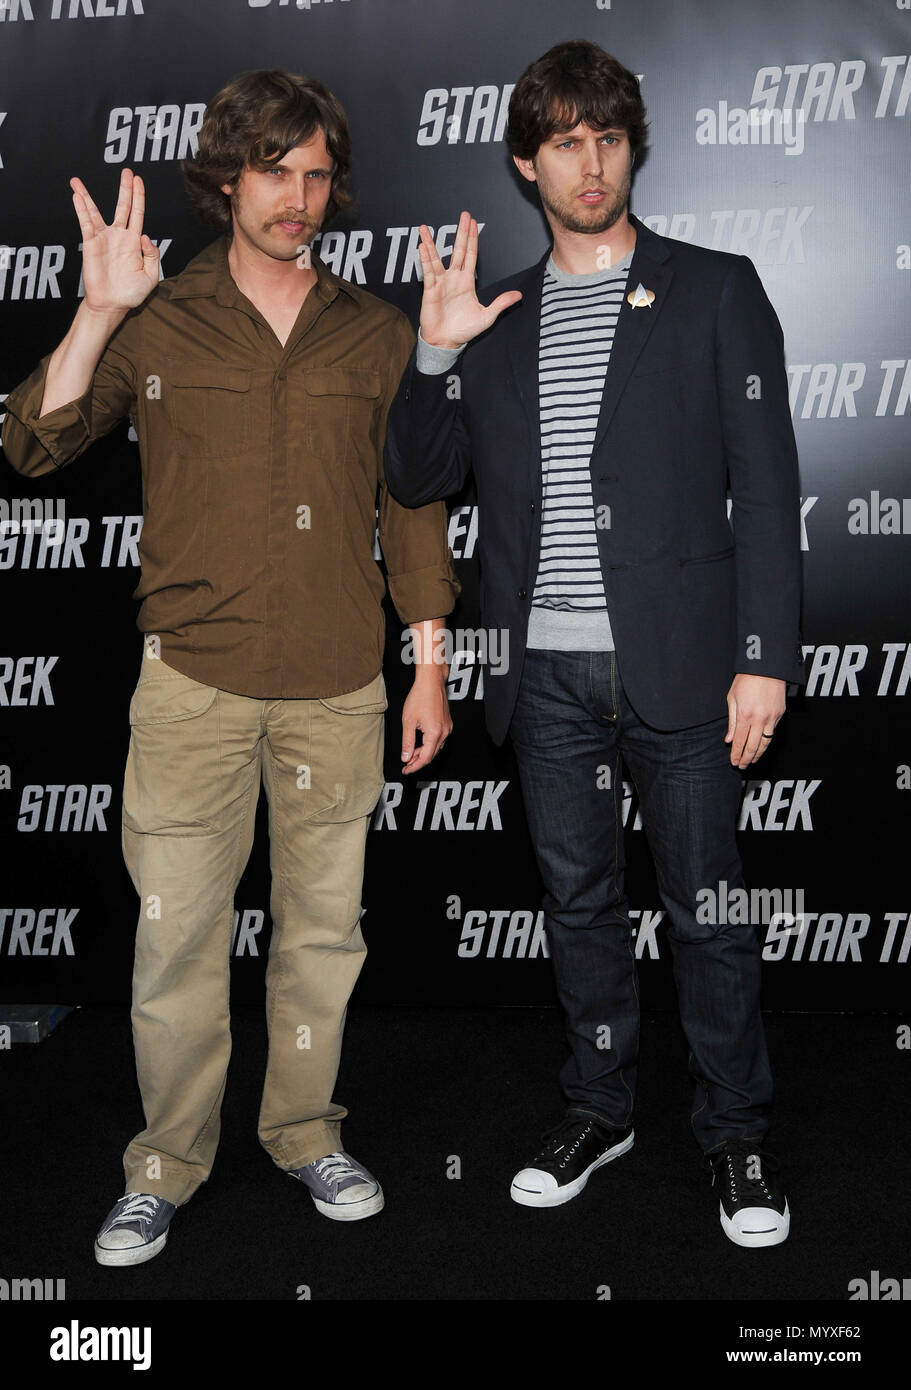 Dan and Jon Heder - Star Trek Los Angeles Premiere at the Chinese Theatre In Los Angeles.HederDan_Jon_77  Event in Hollywood Life - California, Red Carpet Event, USA, Film Industry, Celebrities, Photography, Bestof, Arts Culture and Entertainment, Celebrities fashion, Best of, Hollywood Life, Event in Hollywood Life - California, Red Carpet and backstage, Music celebrities, Topix, Couple, family ( husband and wife ) and kids- Children, brothers and sisters inquiry tsuni@Gamma-USA.com, Credit Tsuni / USA, 2006 to 2009 Stock Photo